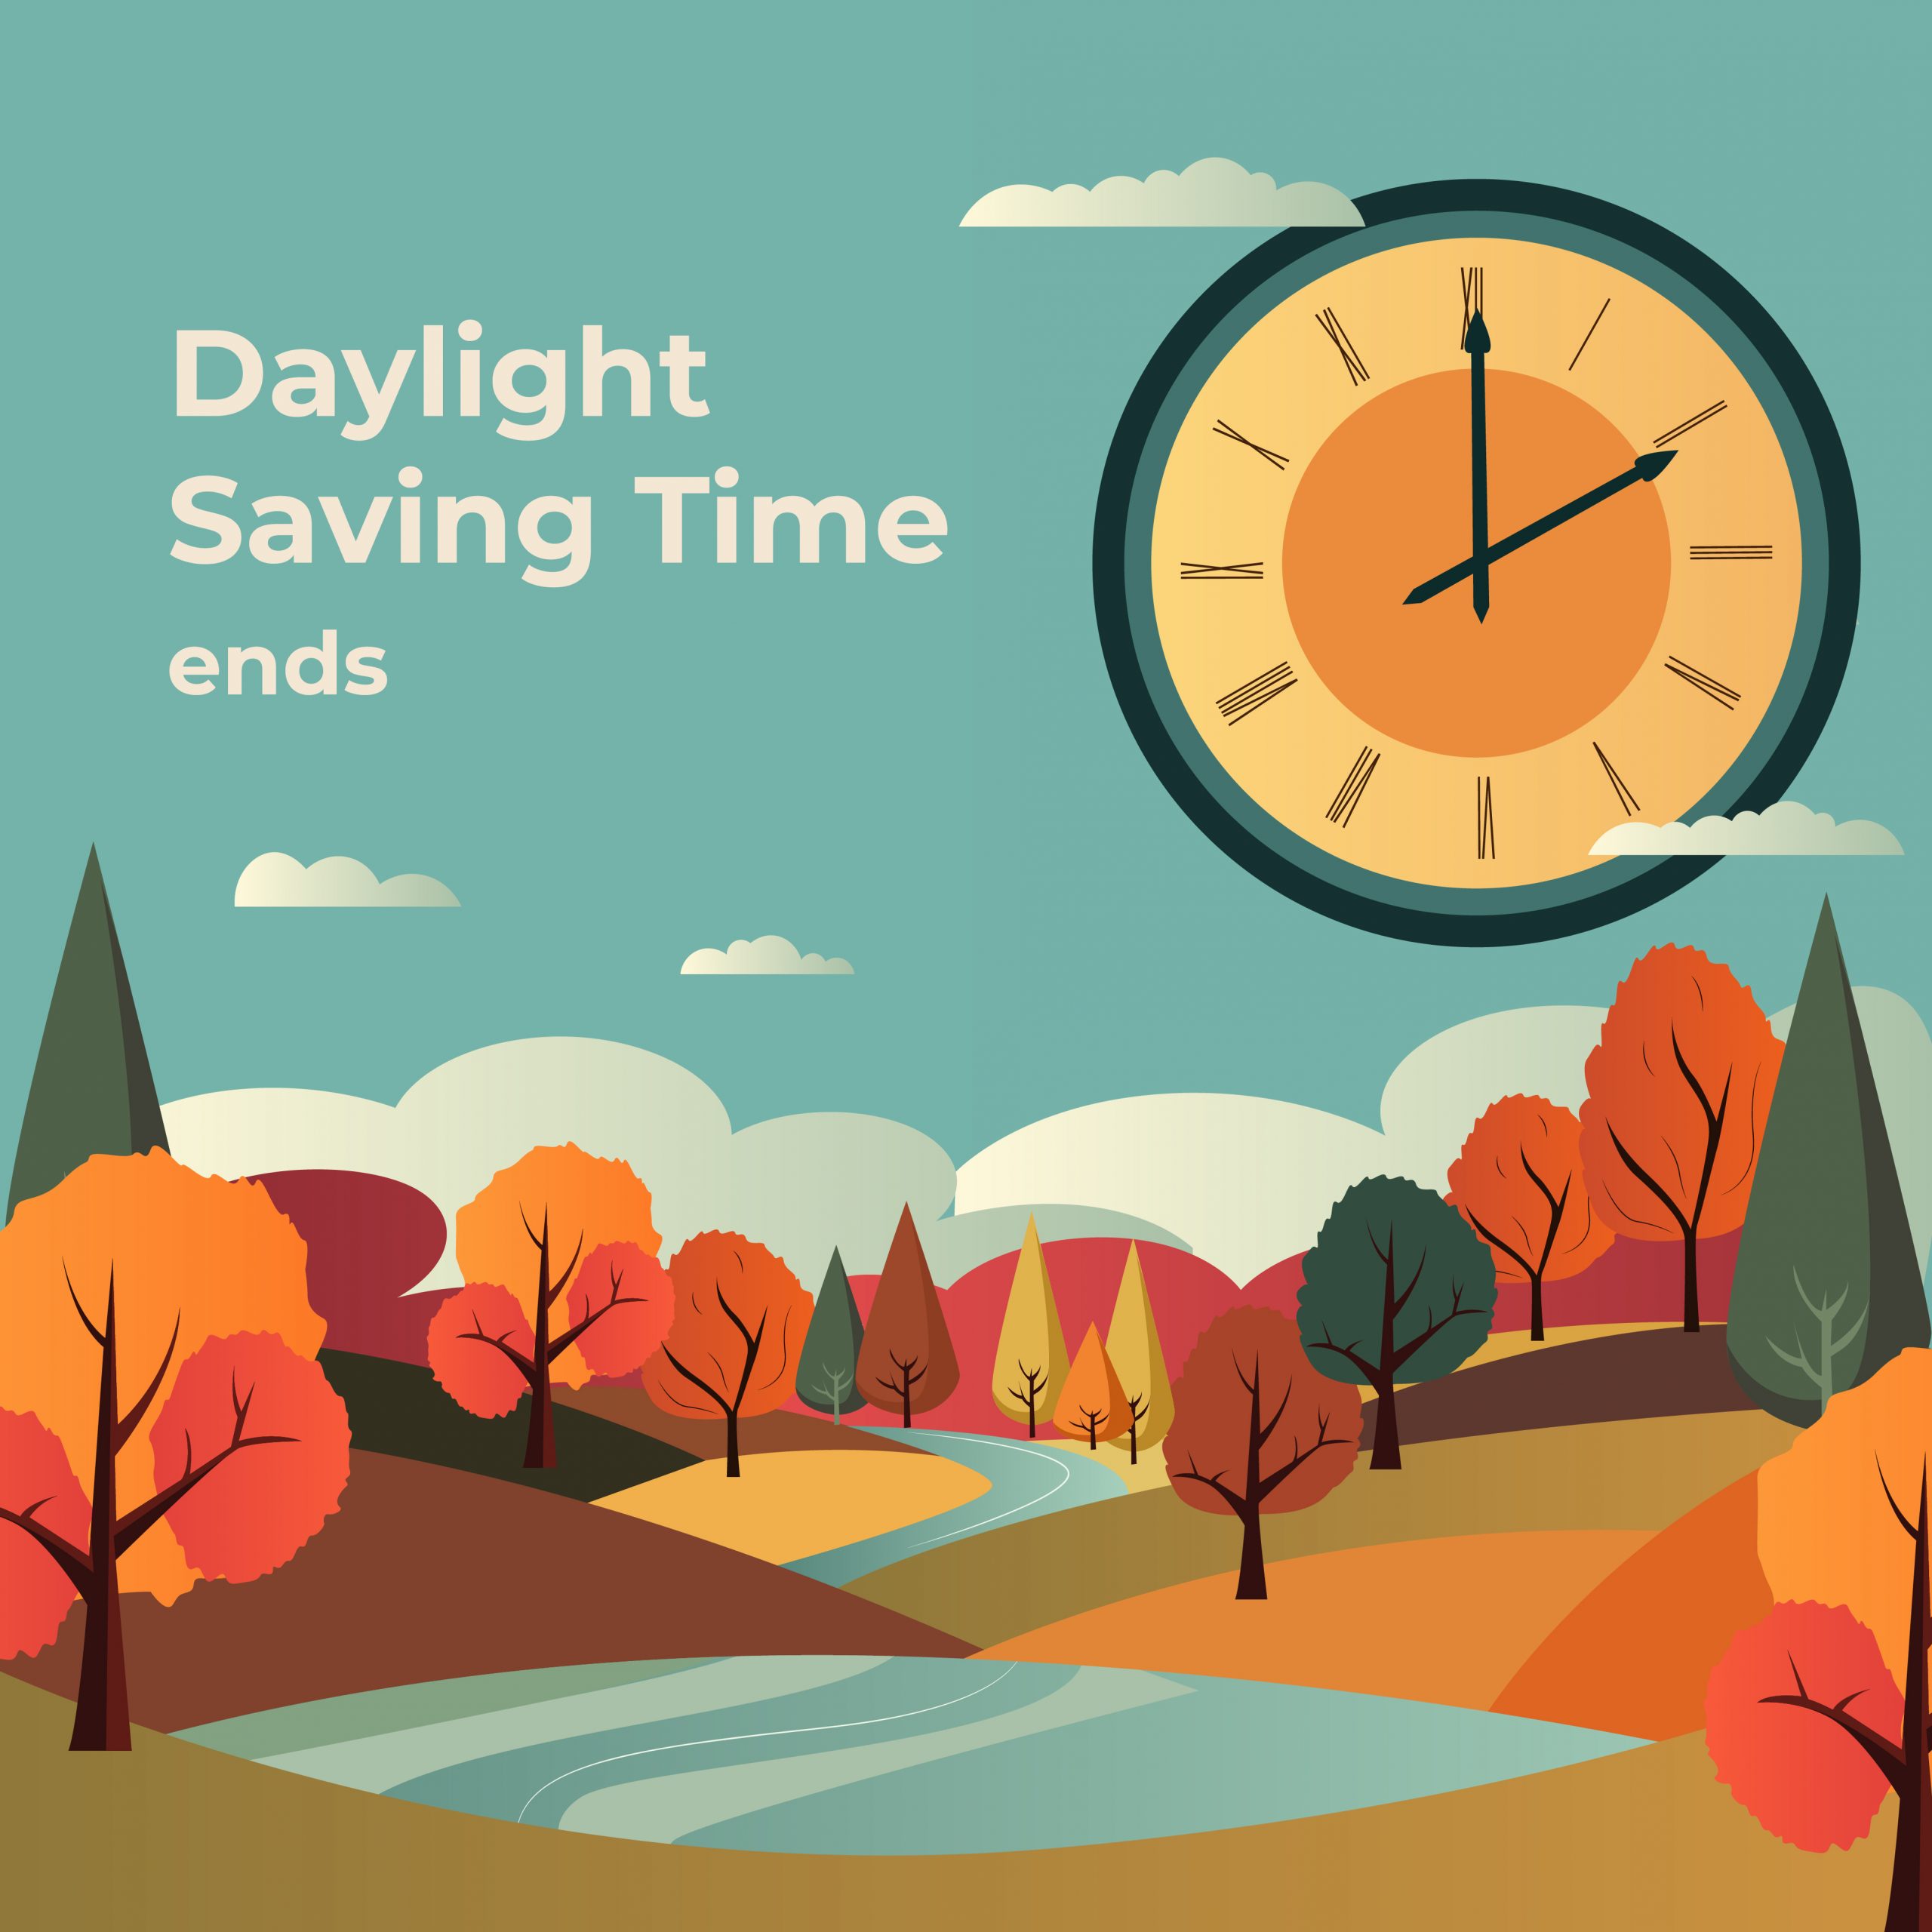 Top tips to remember as Daylight Saving Time ends